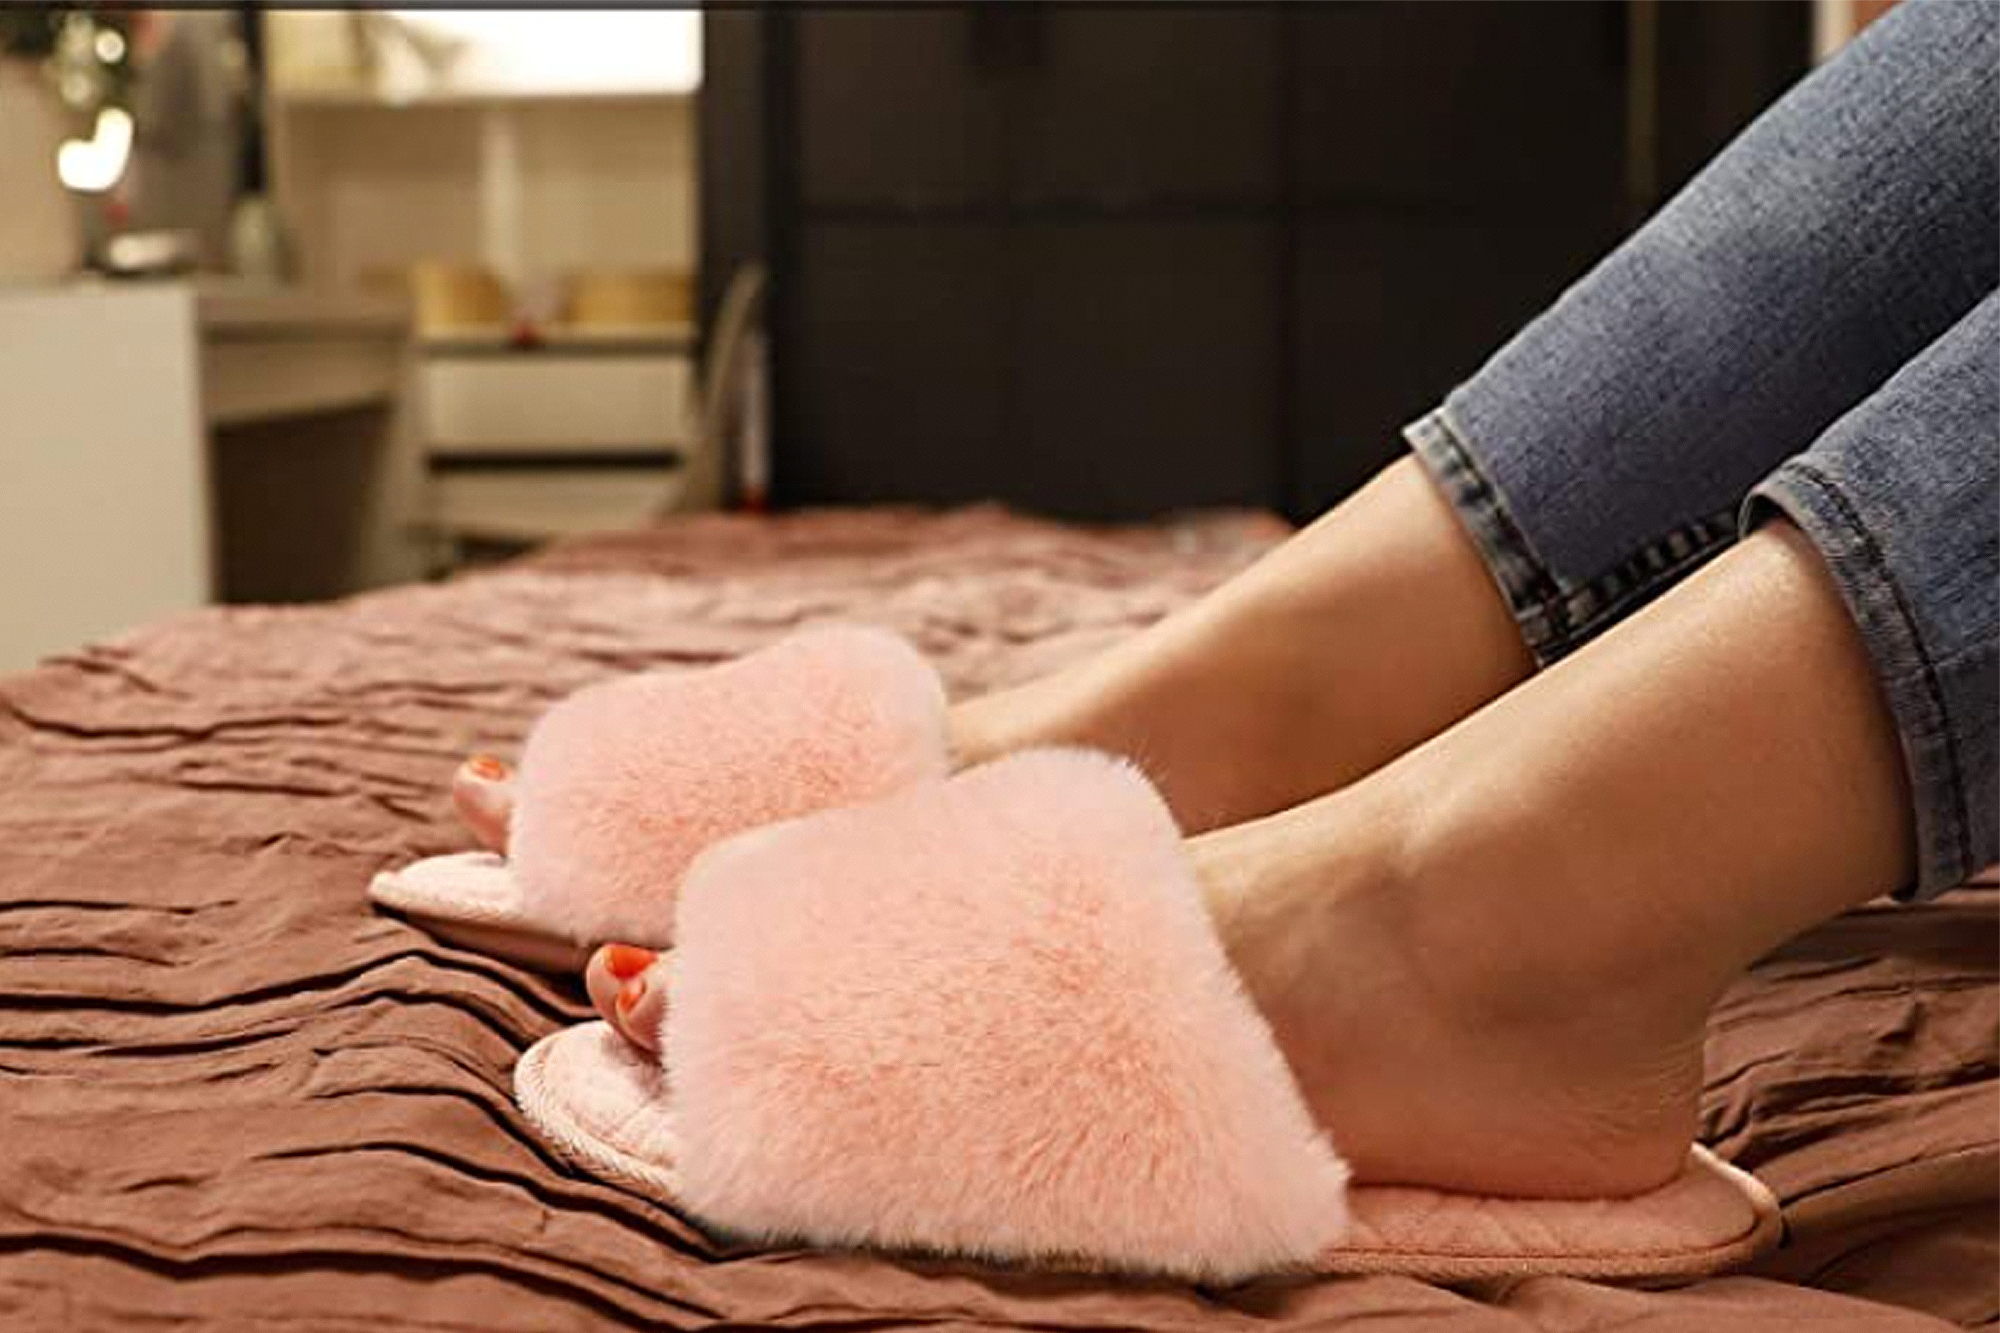 Mitt at tiltrække genvinde LongBay Fuzzy Slippers Will Make You Feel Like You're at a Spa